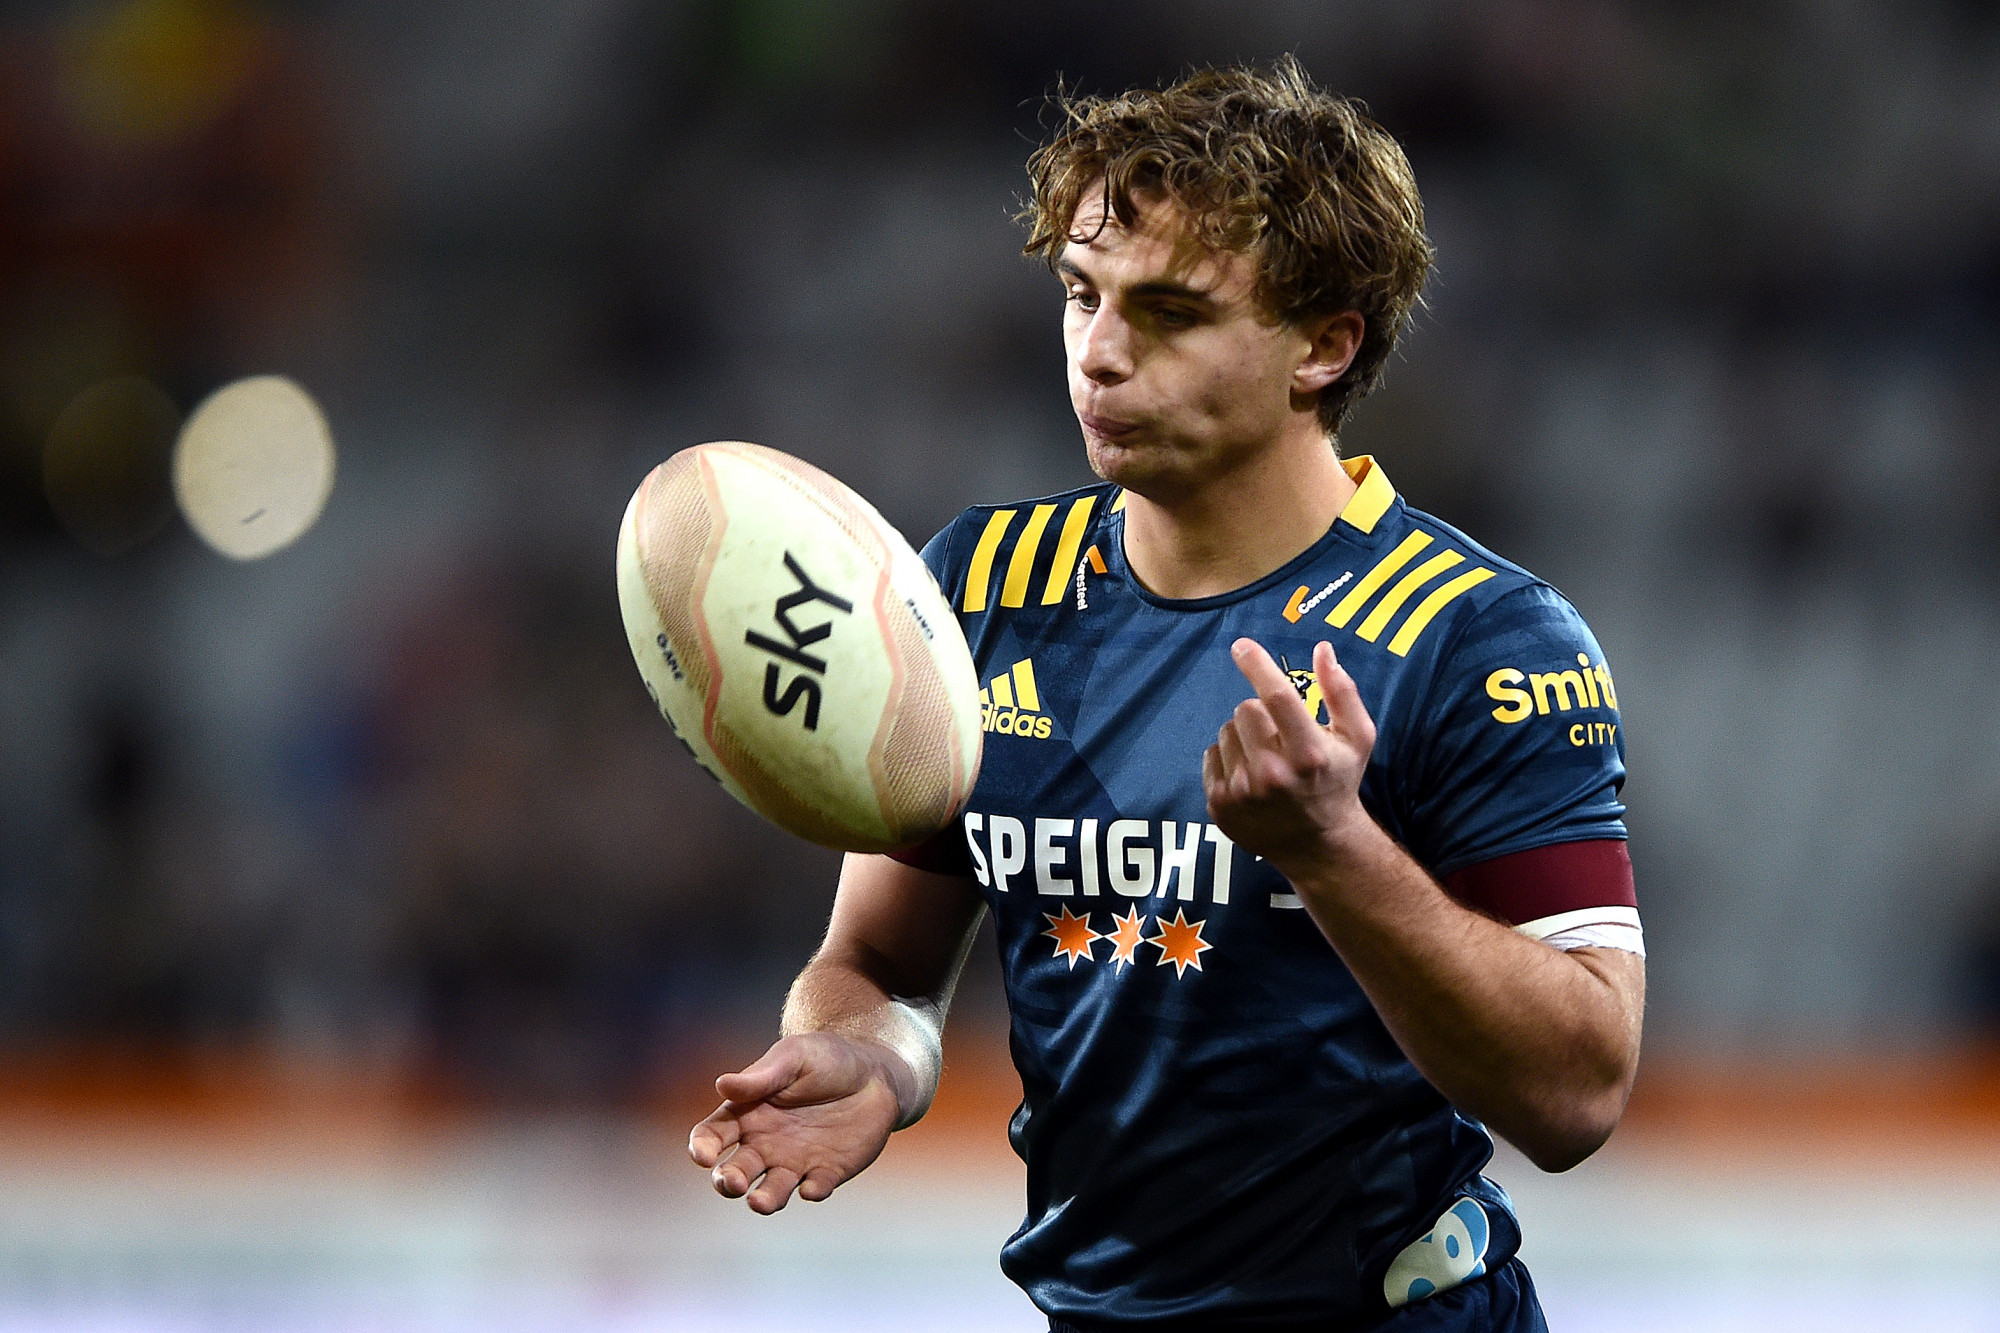 Young Halfback Confirmed for Highlanders | Highlanders Rugby Club Limited Partnership